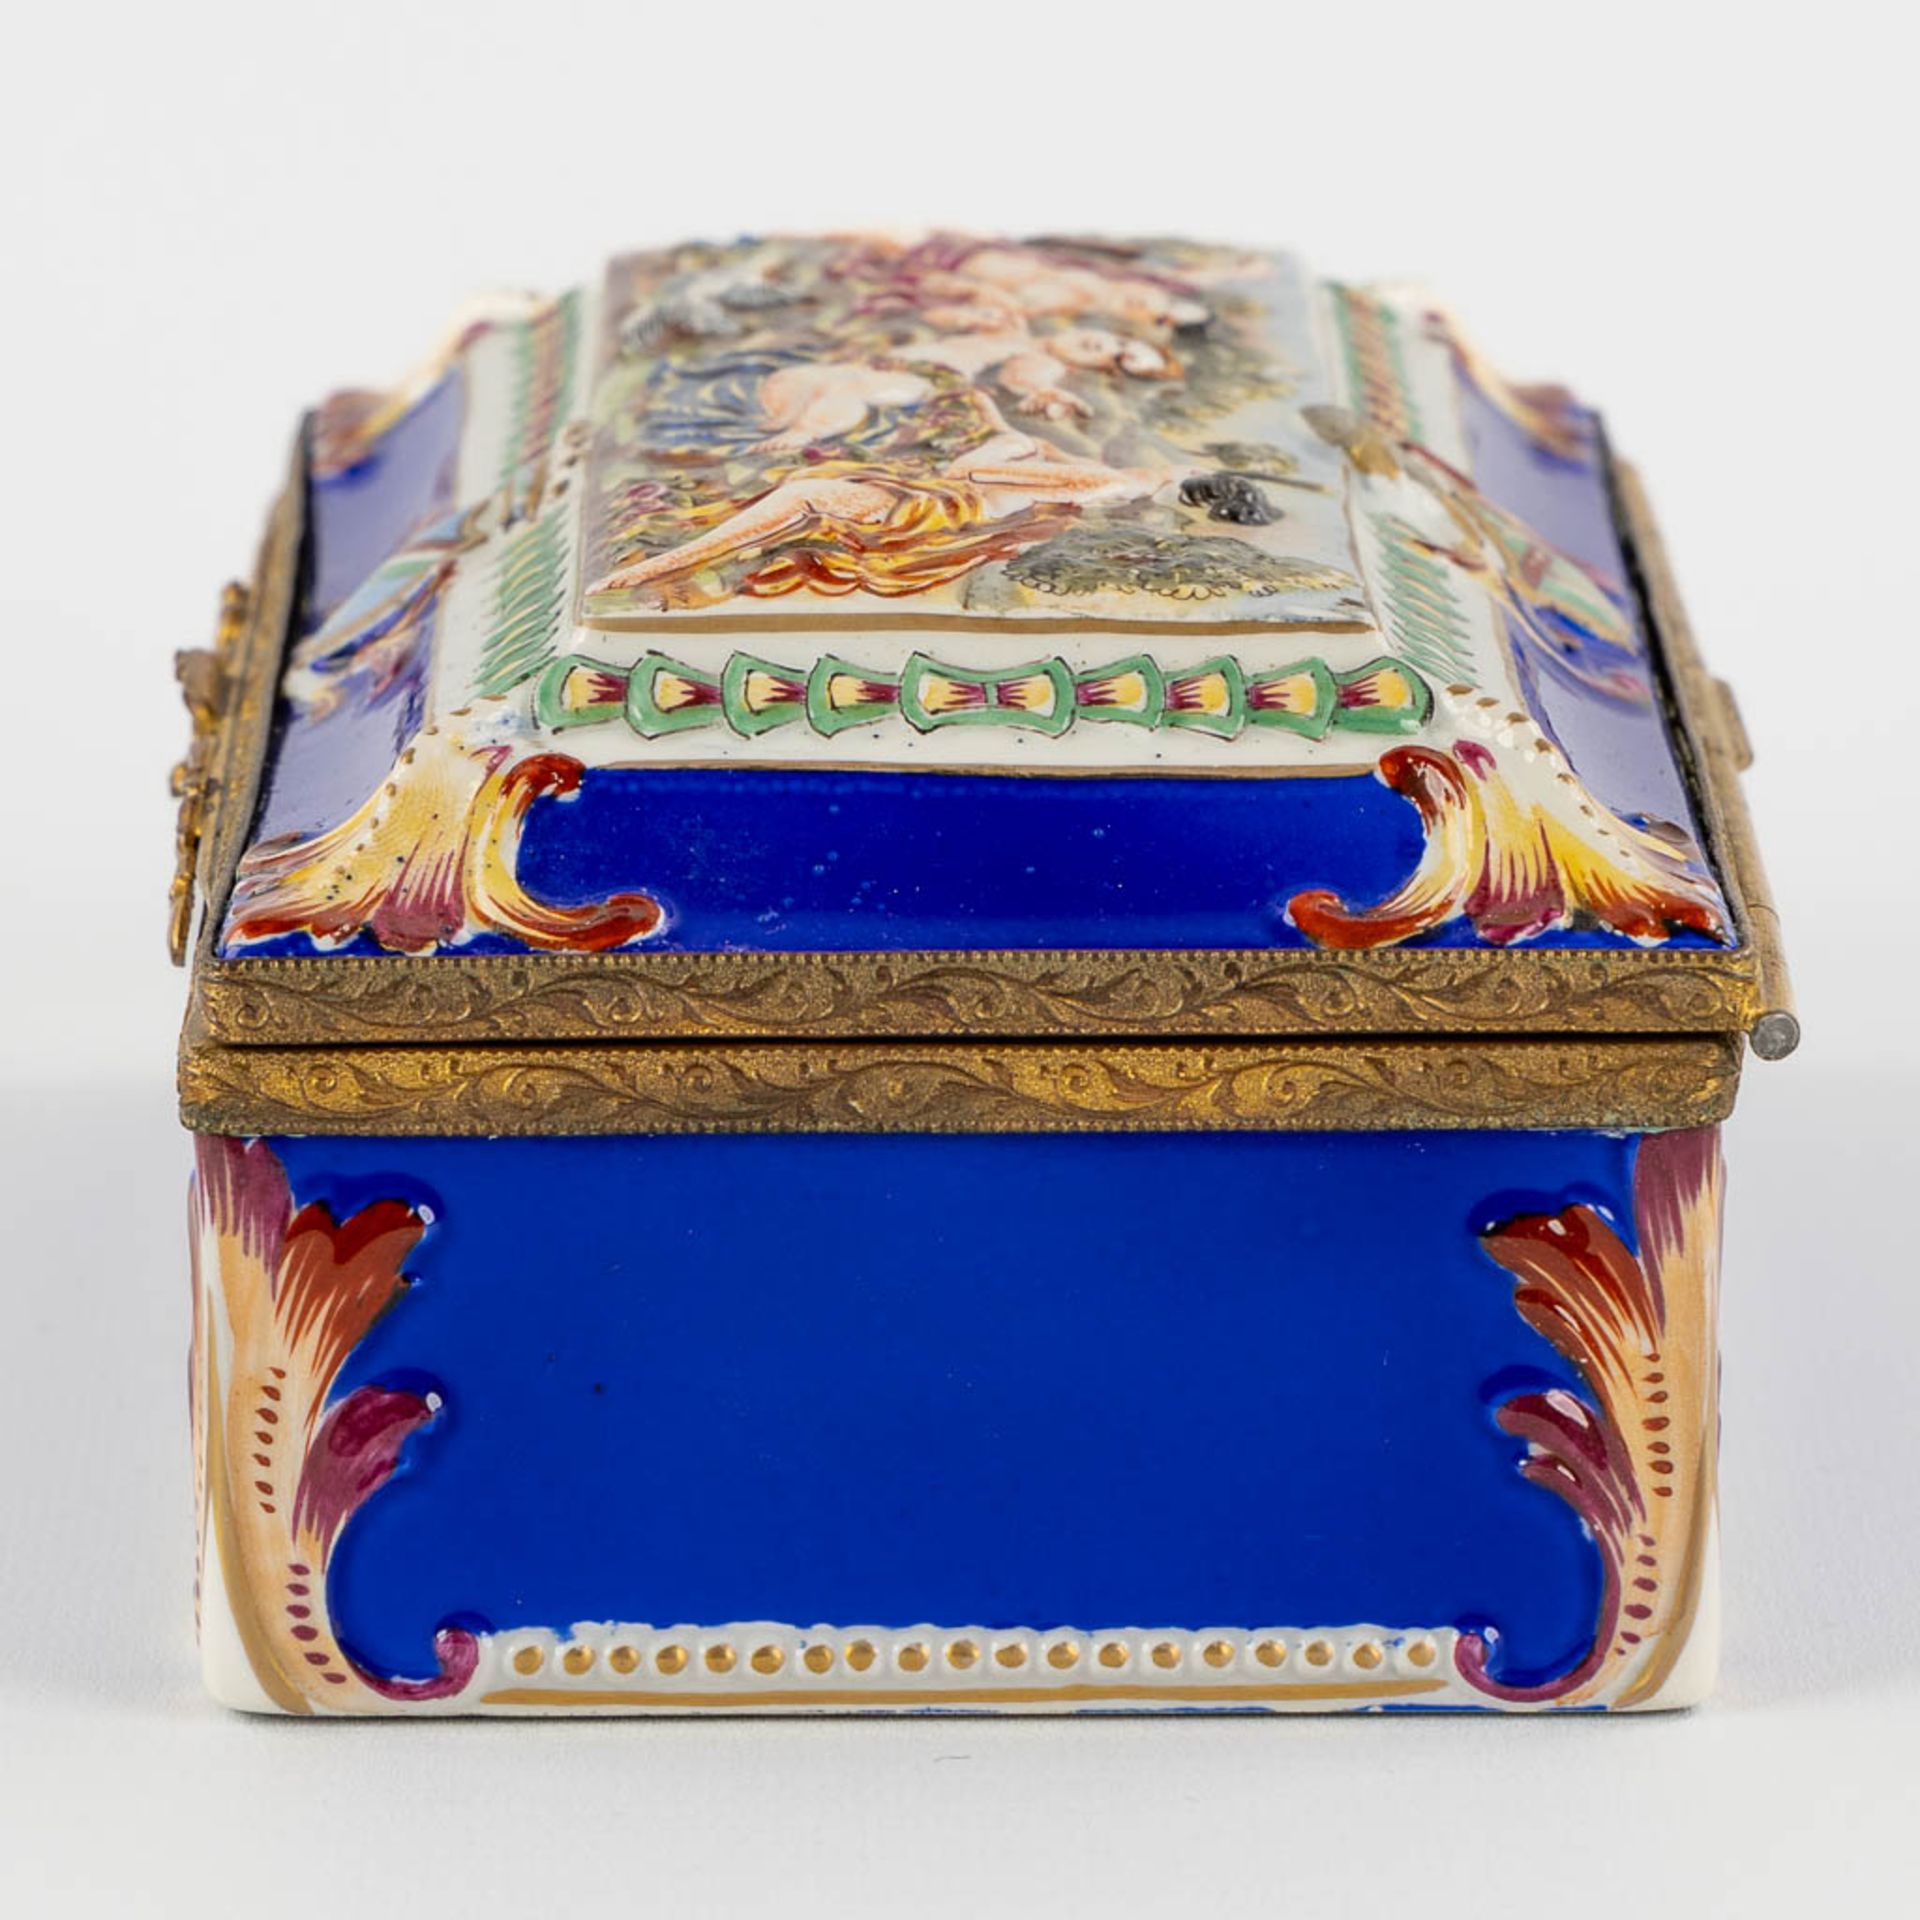 Capodimonte, a finely made porcelain jewellery box. 19th C. (L:10 x W:19 x H:7 cm) - Image 5 of 12